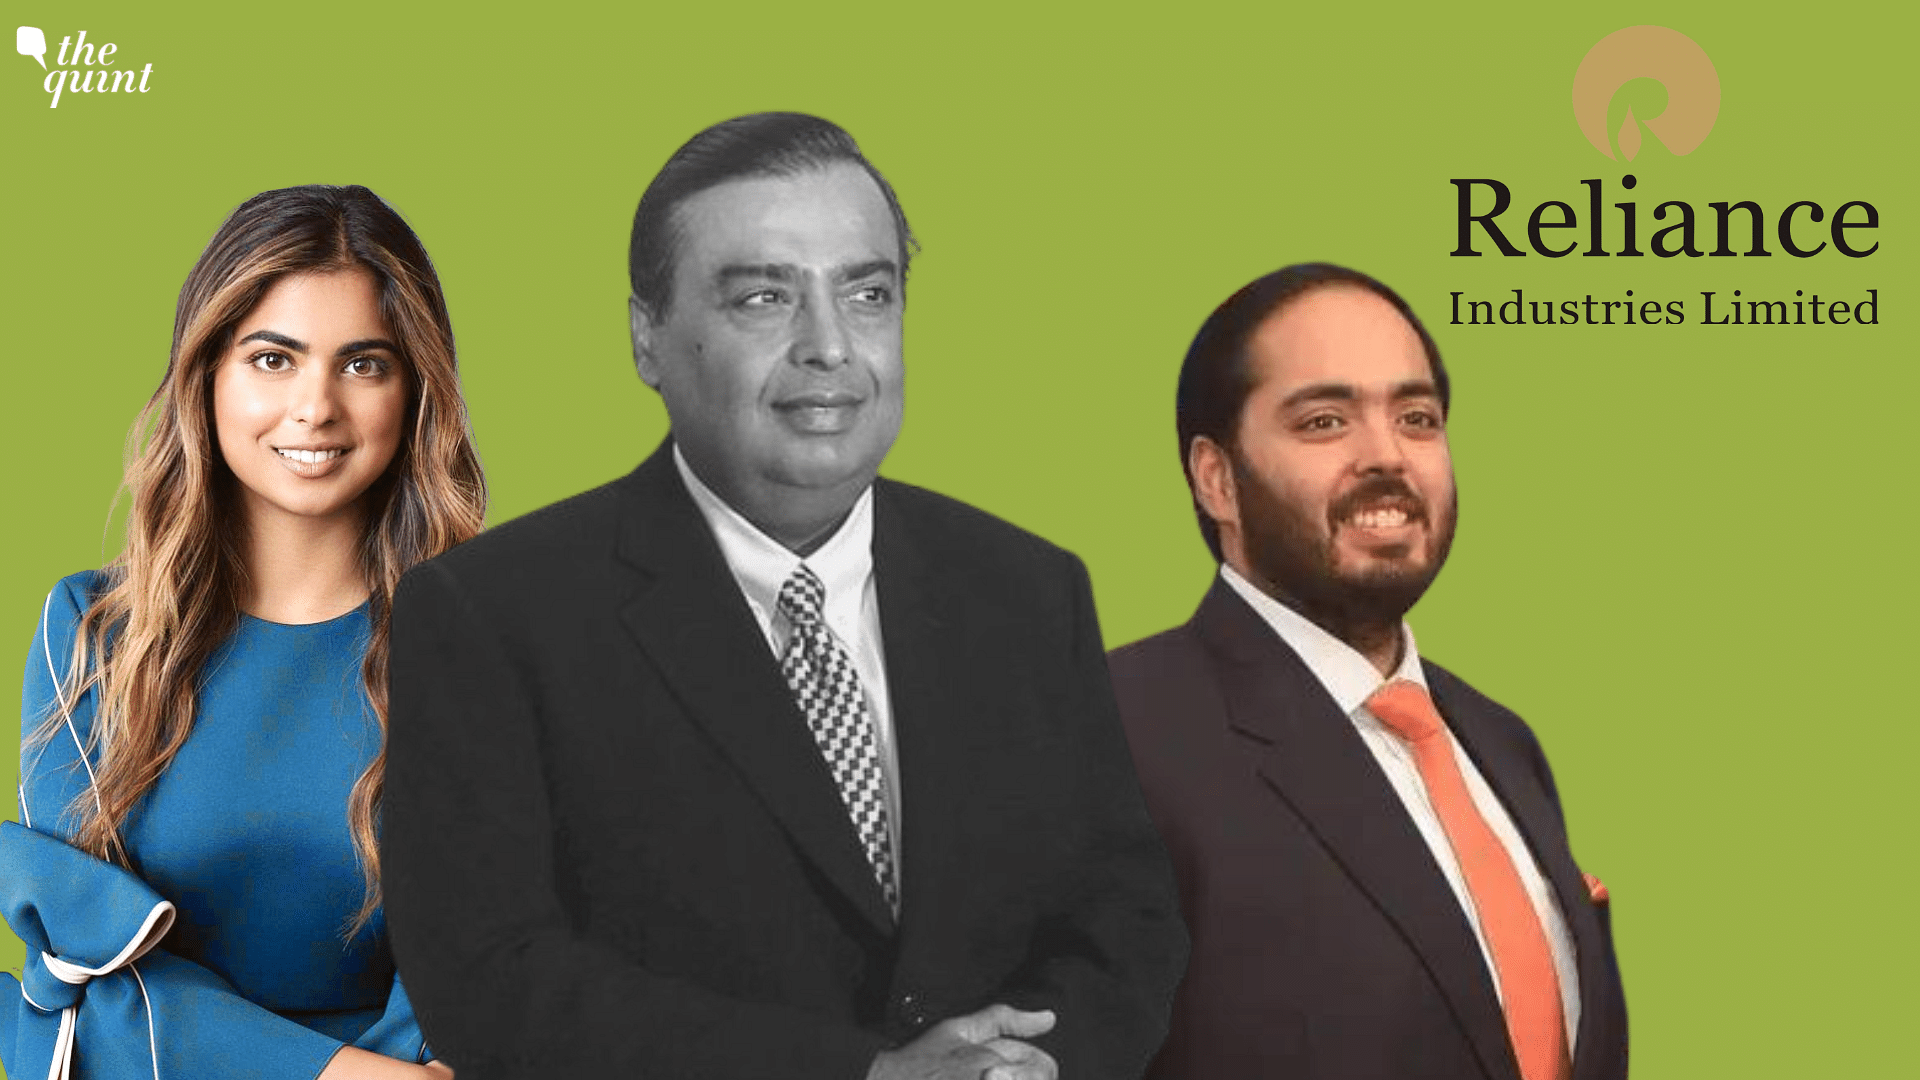 <div class="paragraphs"><p>In a move heralding succession, <a href="https://www.thequint.com/topic/mukesh-ambani">Mukesh Ambani</a>, the chairman and managing director of Reliance Industries, introduced his daughter <a href="https://www.thequint.com/news/business/akash-ambani-mukesh-ambani-reliance-jio-chairman-isha-ambani#read-more">Isha</a> as the leader of <a href="https://thequint.com/news/india/forbes-list-richest-people-in-the-world-ambani-adani-elon-musk-jeff-bezos">Reliance</a> group's retail business, at the Reliance annual general meeting (AGM) on Monday, 29 August.</p></div>